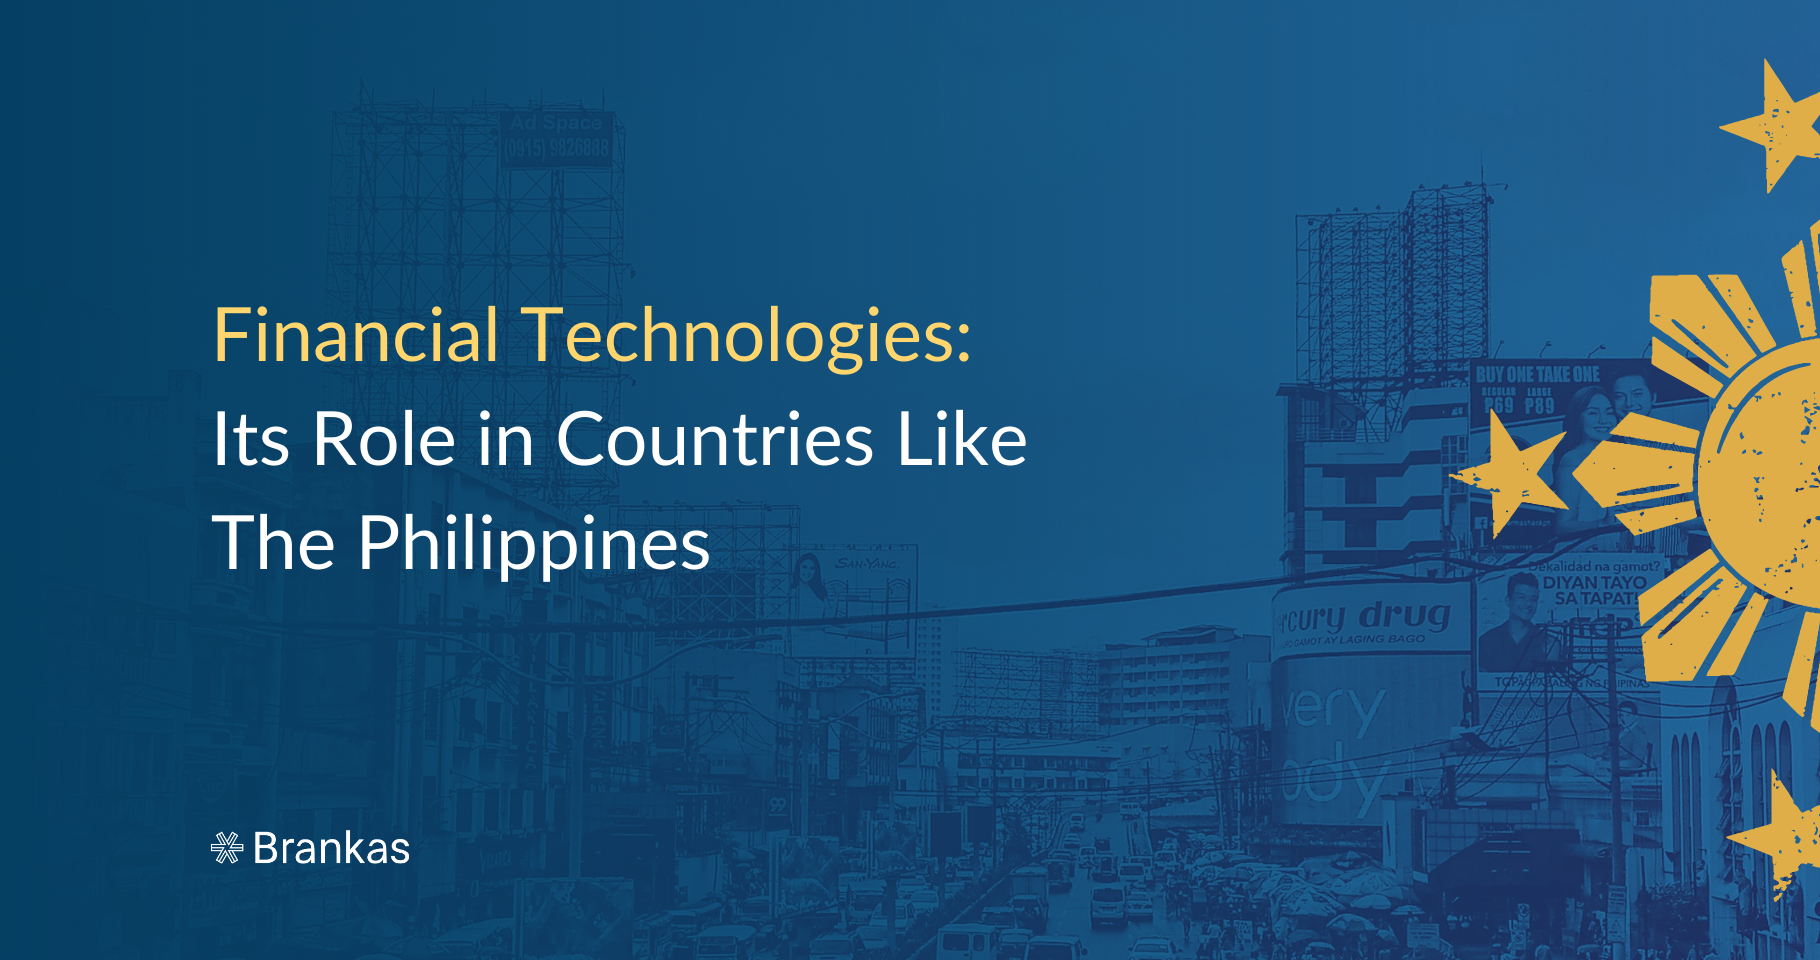 Financial Technologies:<br>Its Role in Countries Like The Philippines